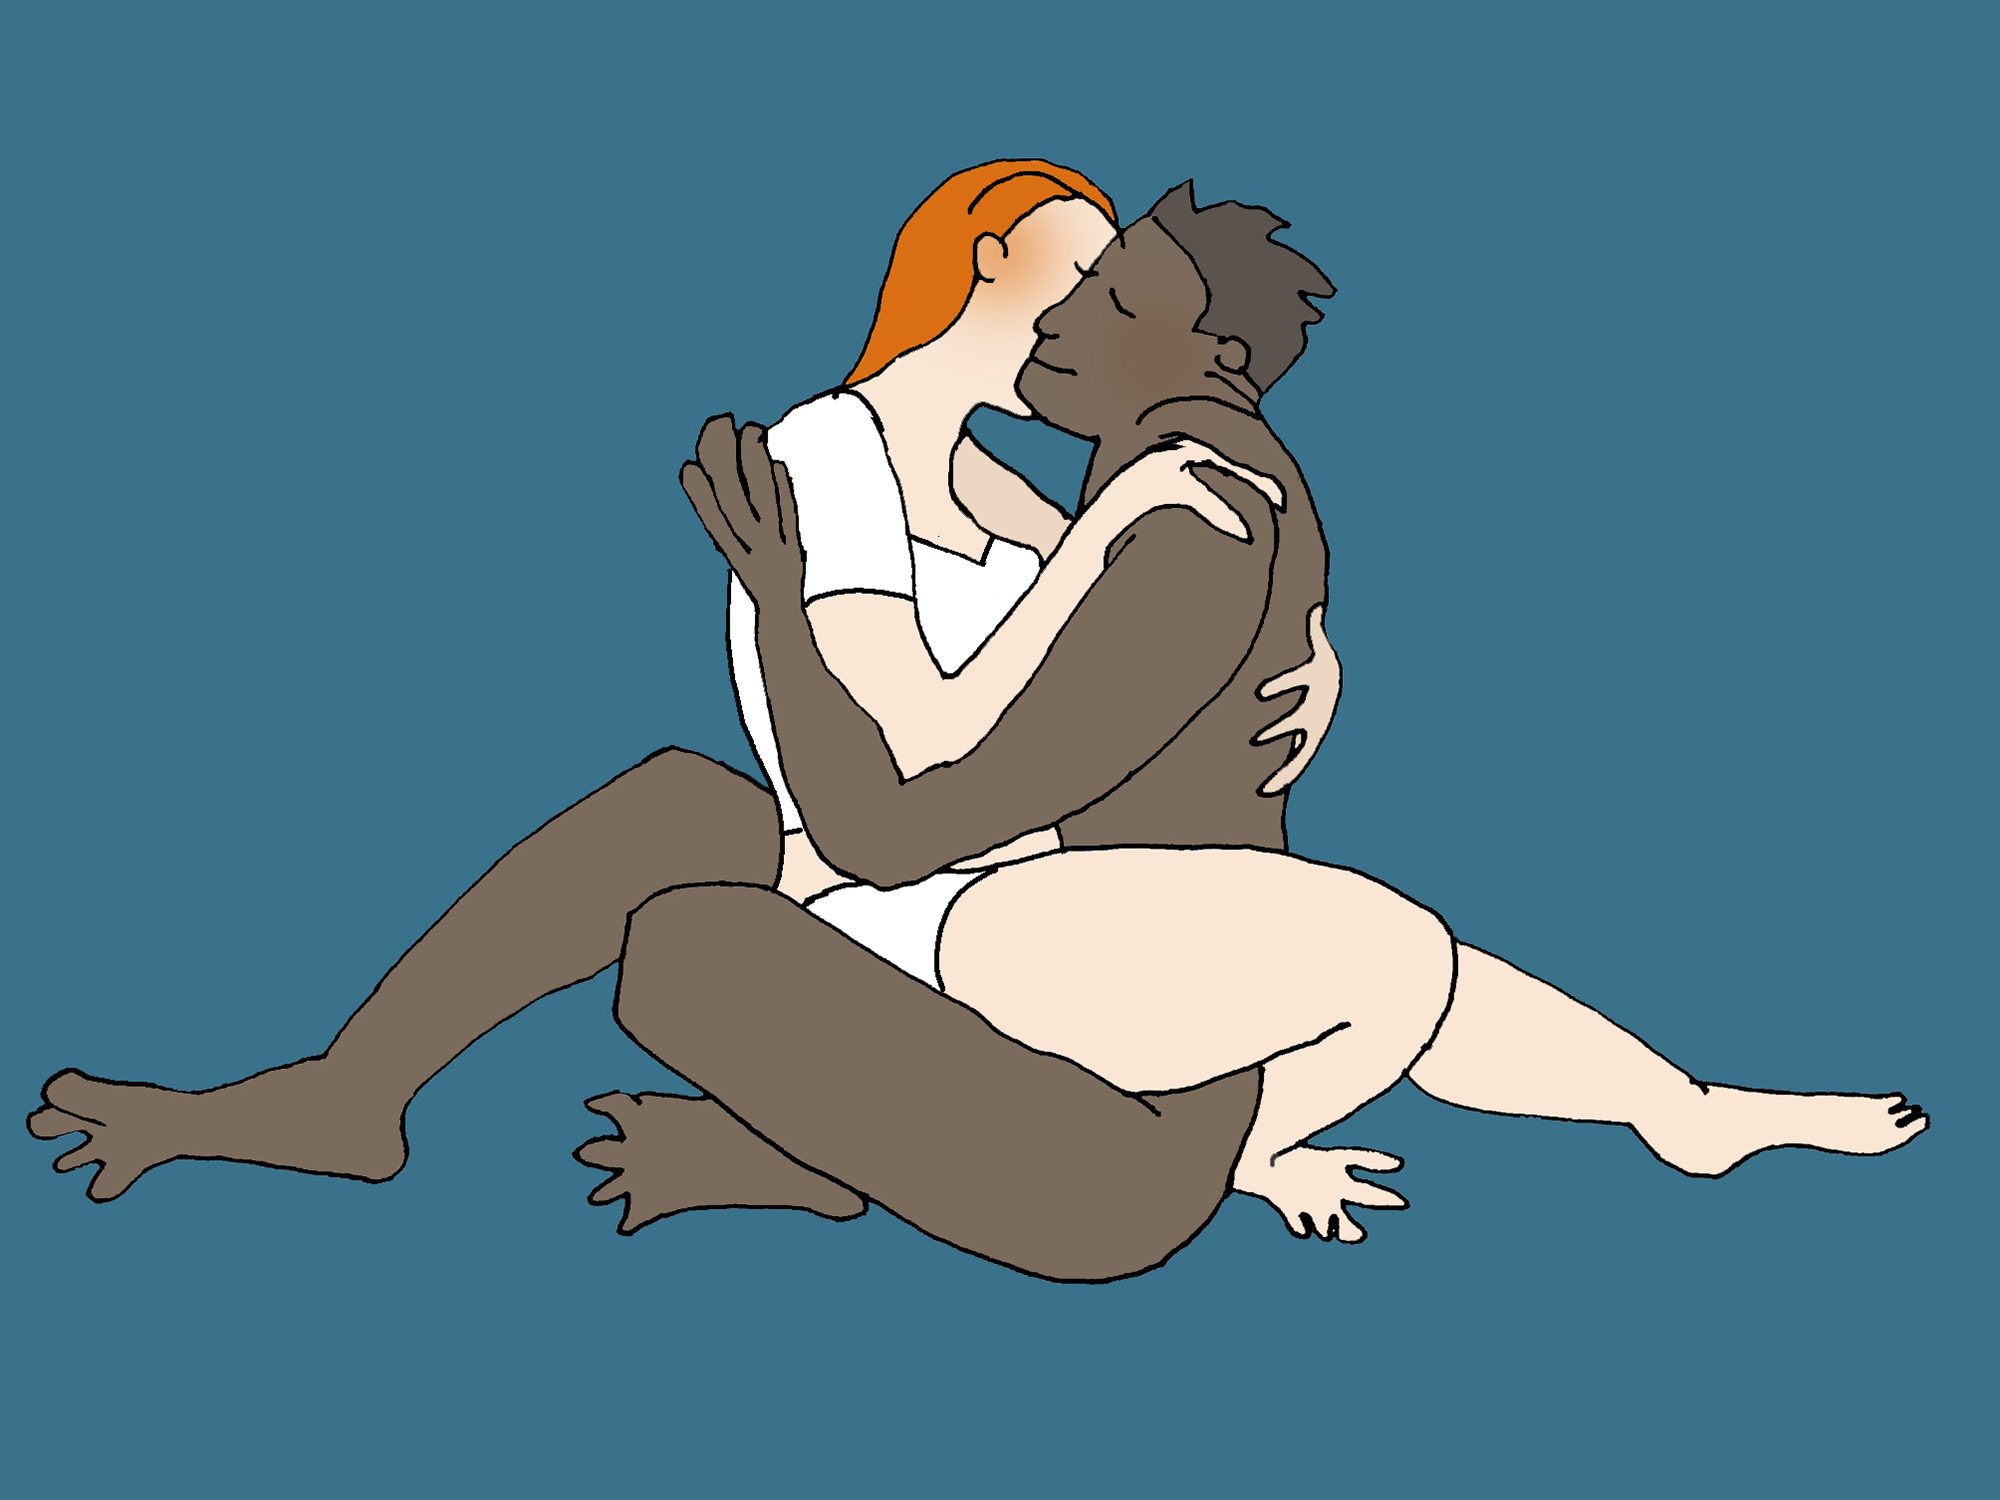 A woman in her underwear sits on a naked man. She puts her leg and arms around him.